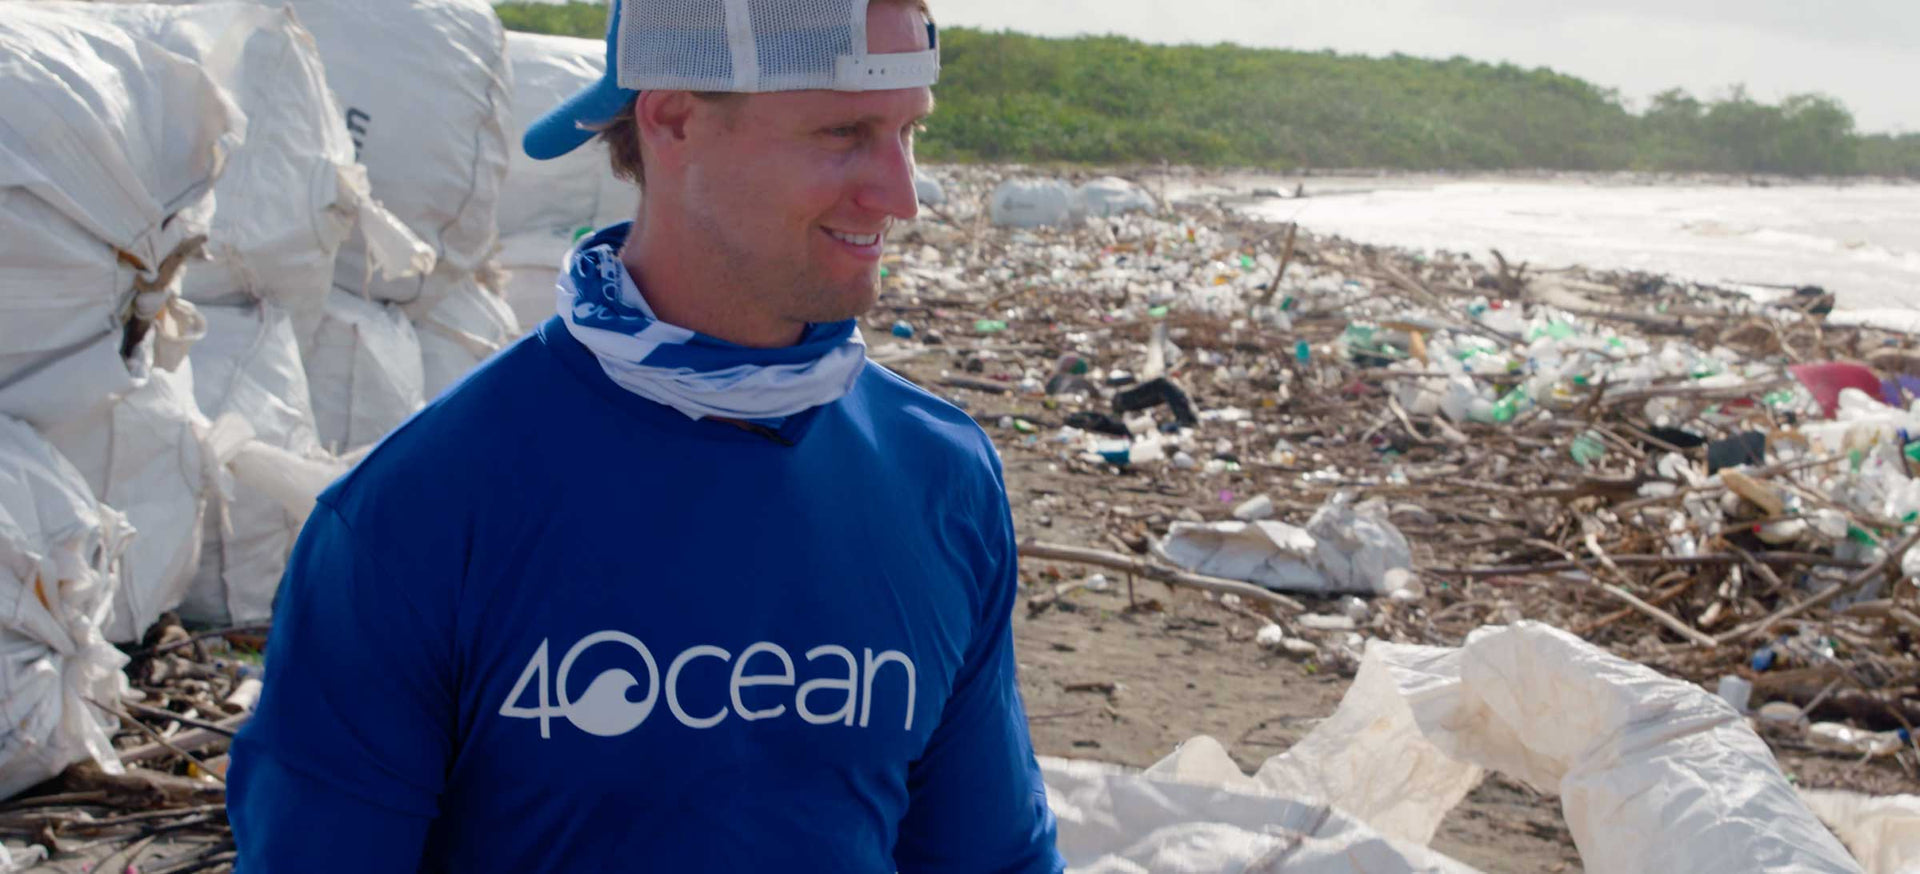 The 4ocean Bracelet Every purchase pulls a pound of plastic from